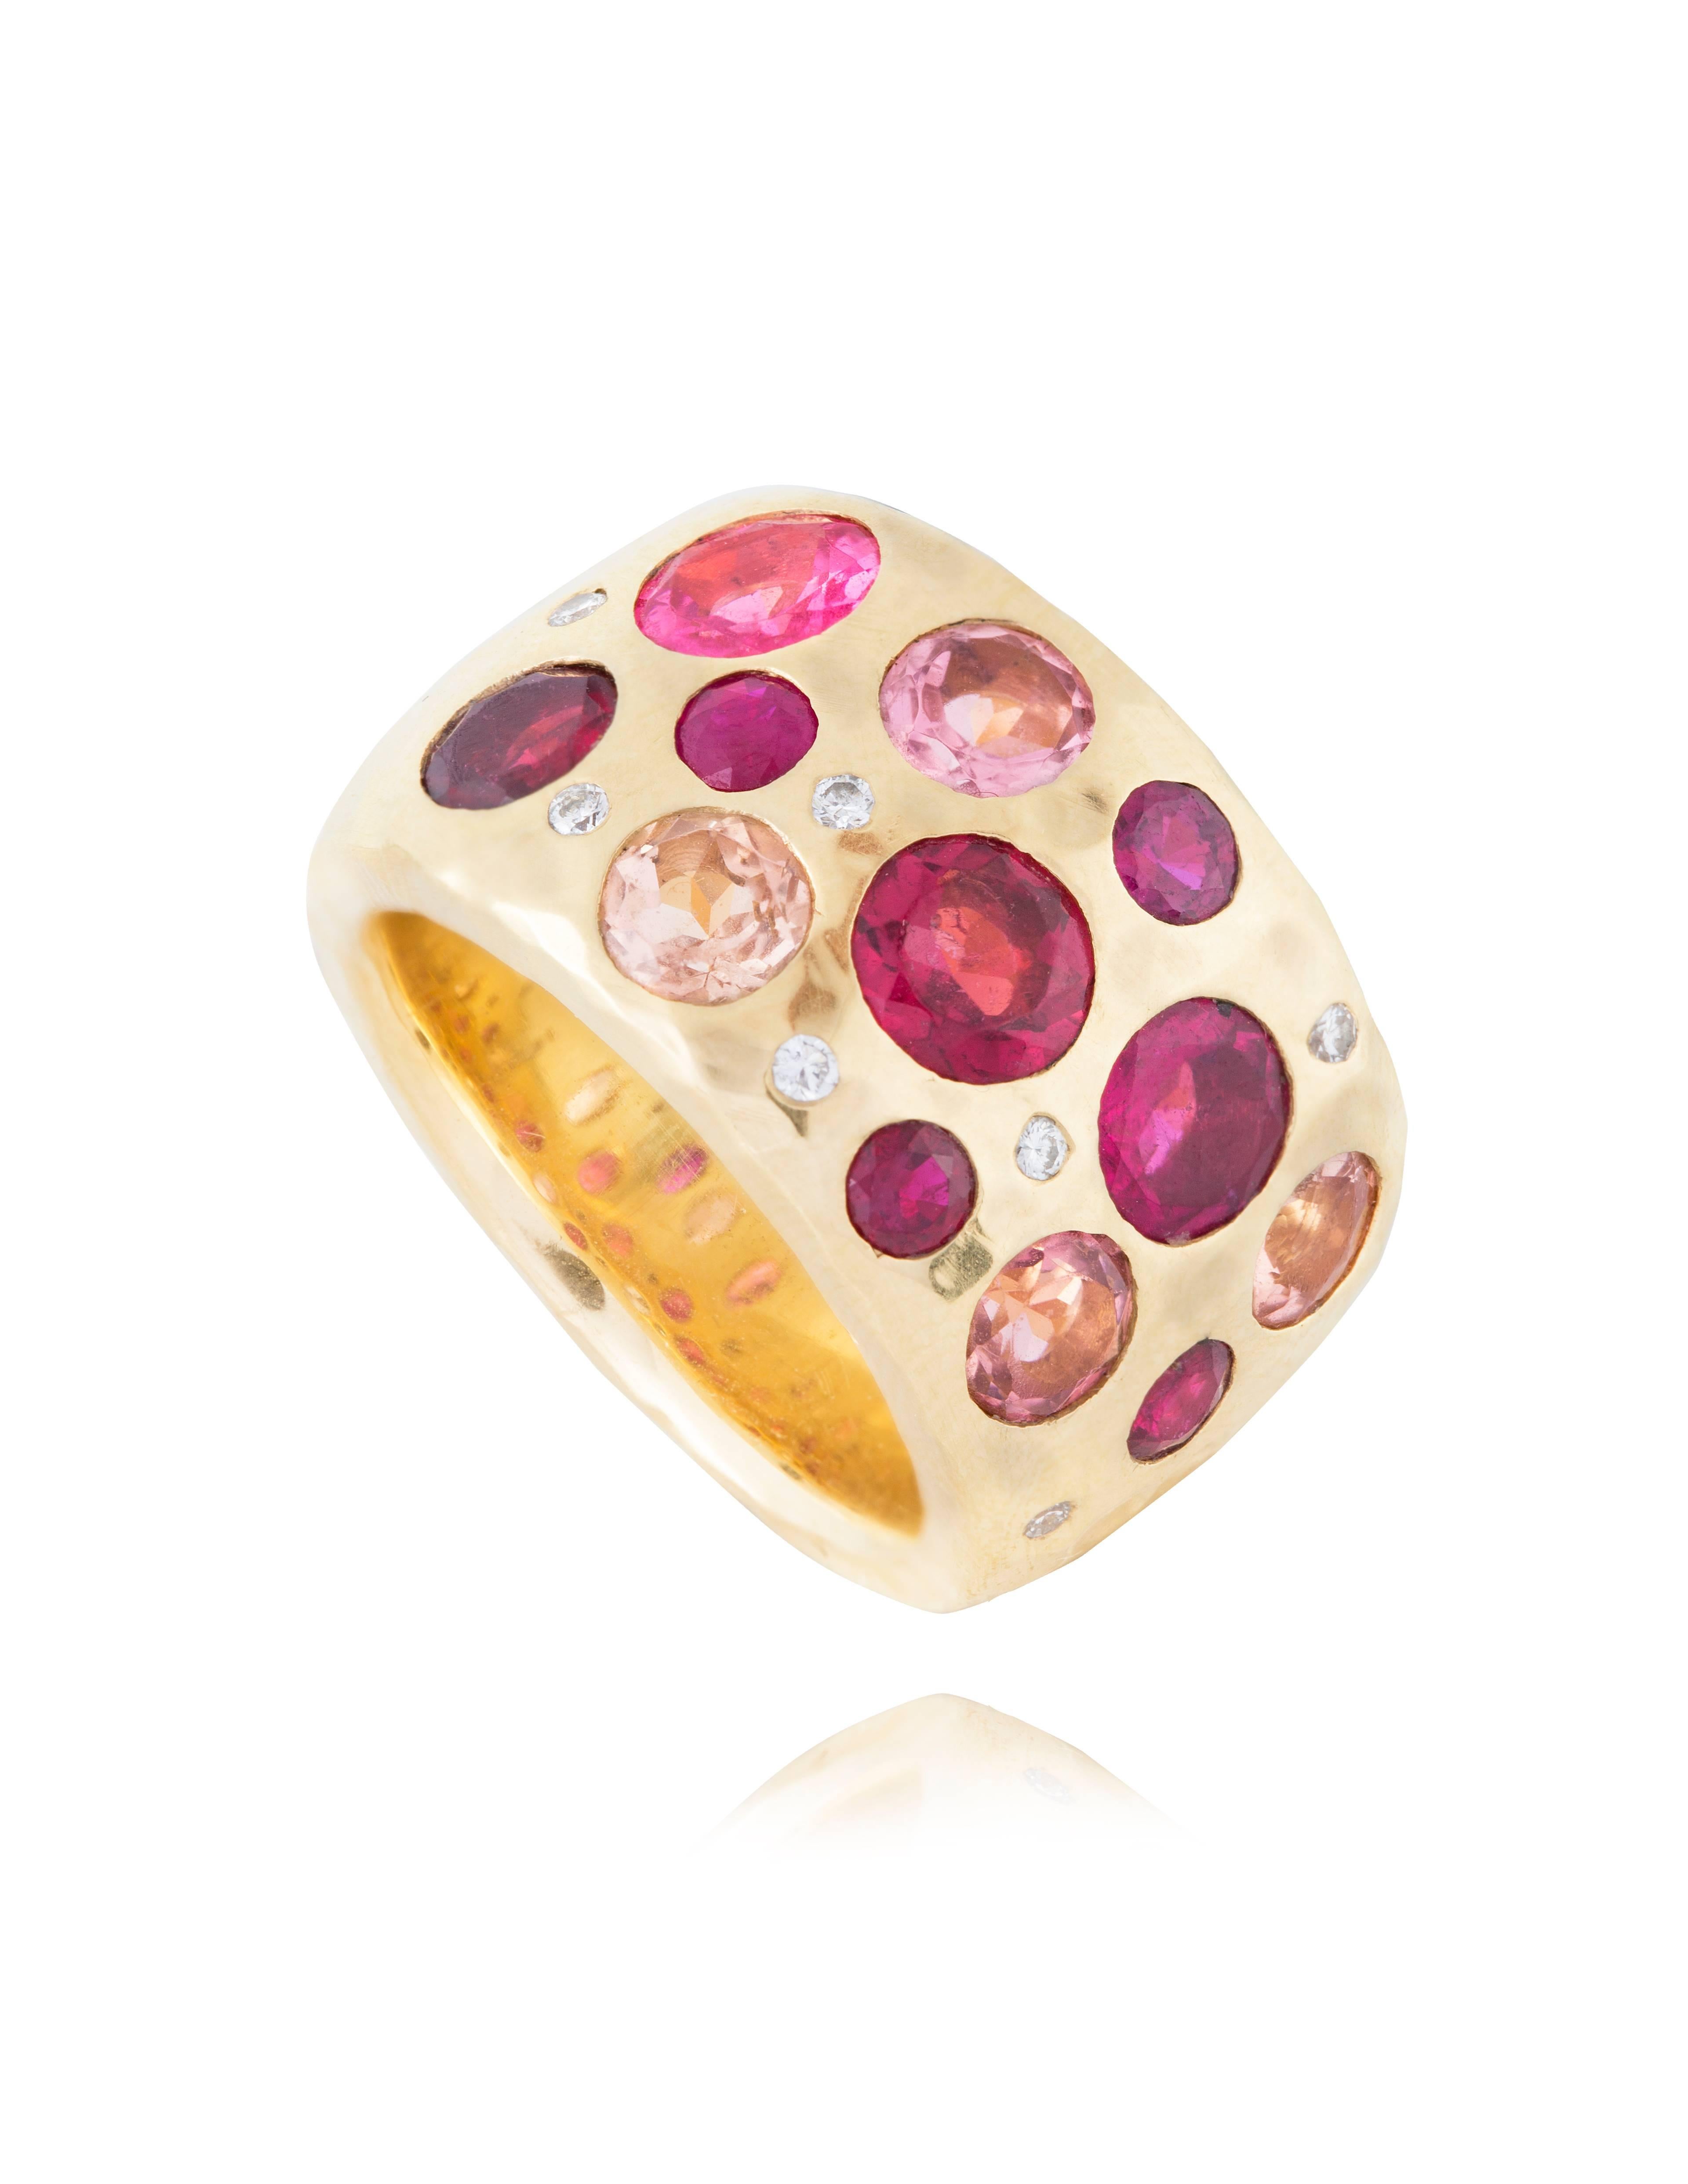 Pink Tourmaline, Ruby, Spinel and Diamond 18 Karat Gold Love Ring. 

The ring is handmade with a hand beaten gold finish. The ring is solid gold and has a feeling of weight to it. 

Ring size in stock is a US 8 / EUR 58

Additional sizes can be made